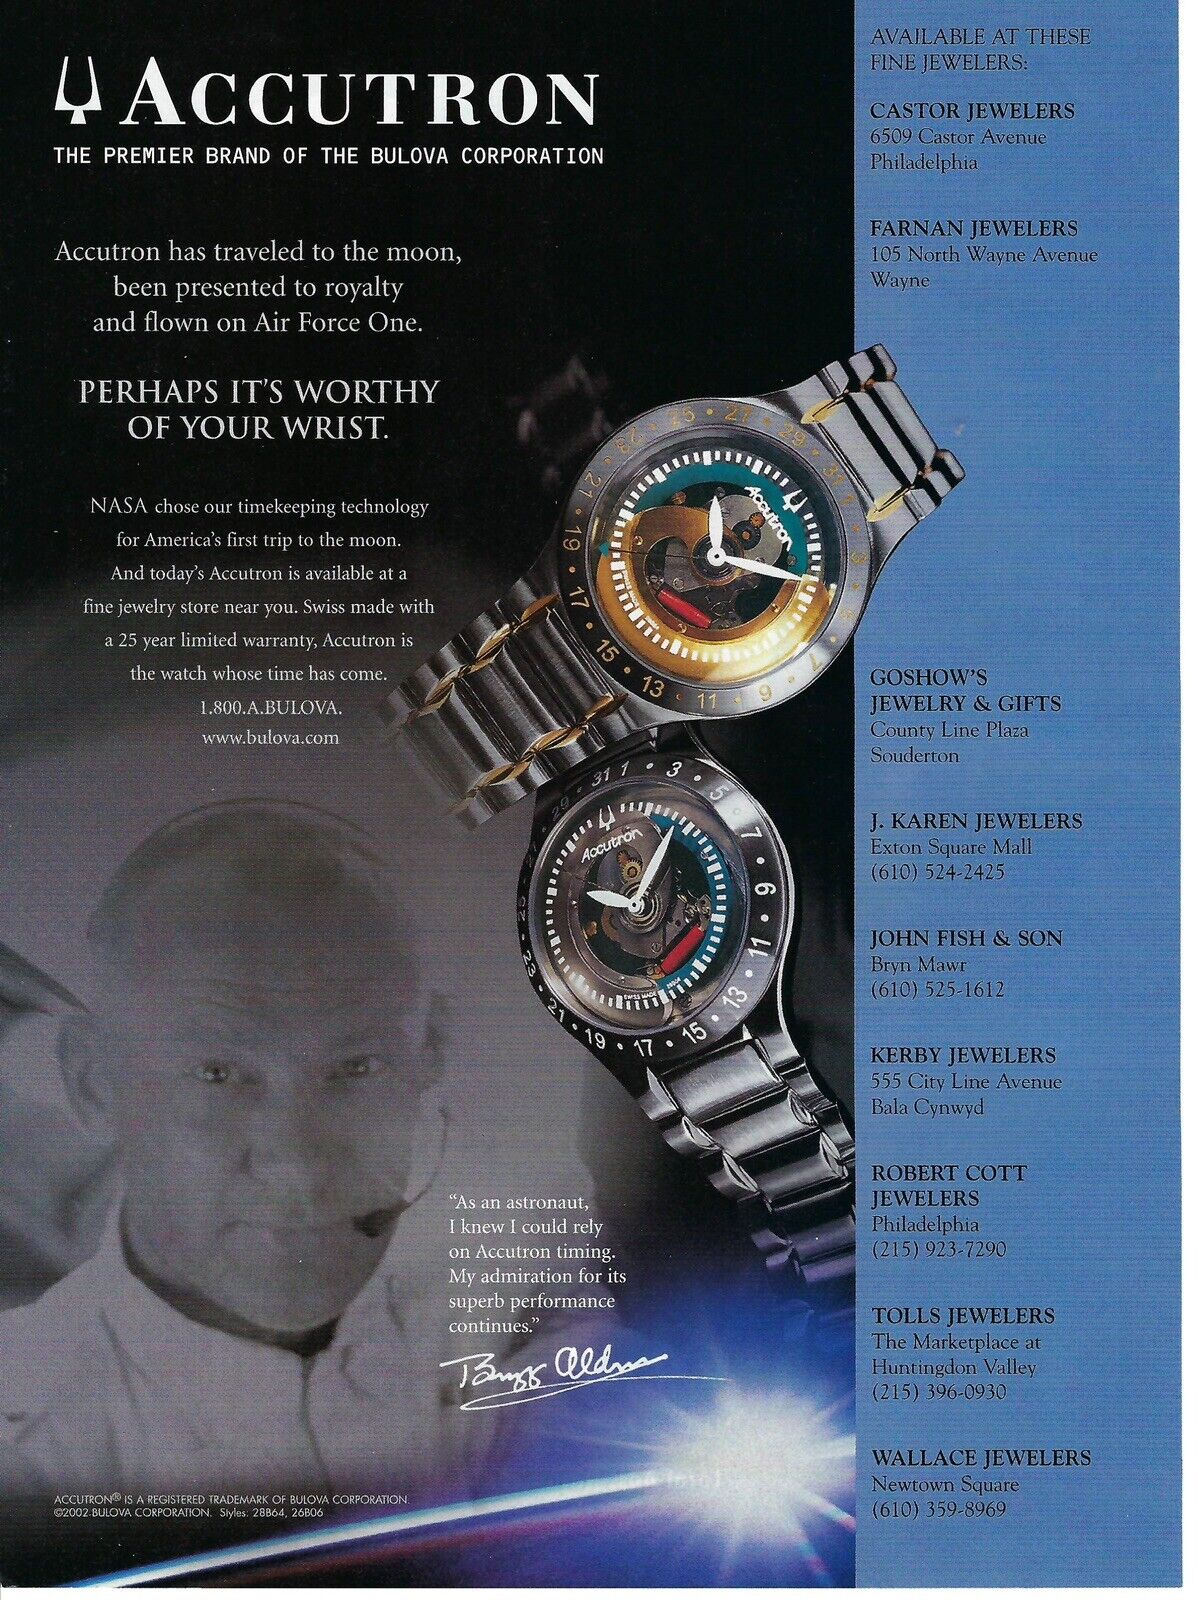 2002 Accutron by Bulova Watch Traveled To The Moon Buzz Aldrin Print Ad/Poster